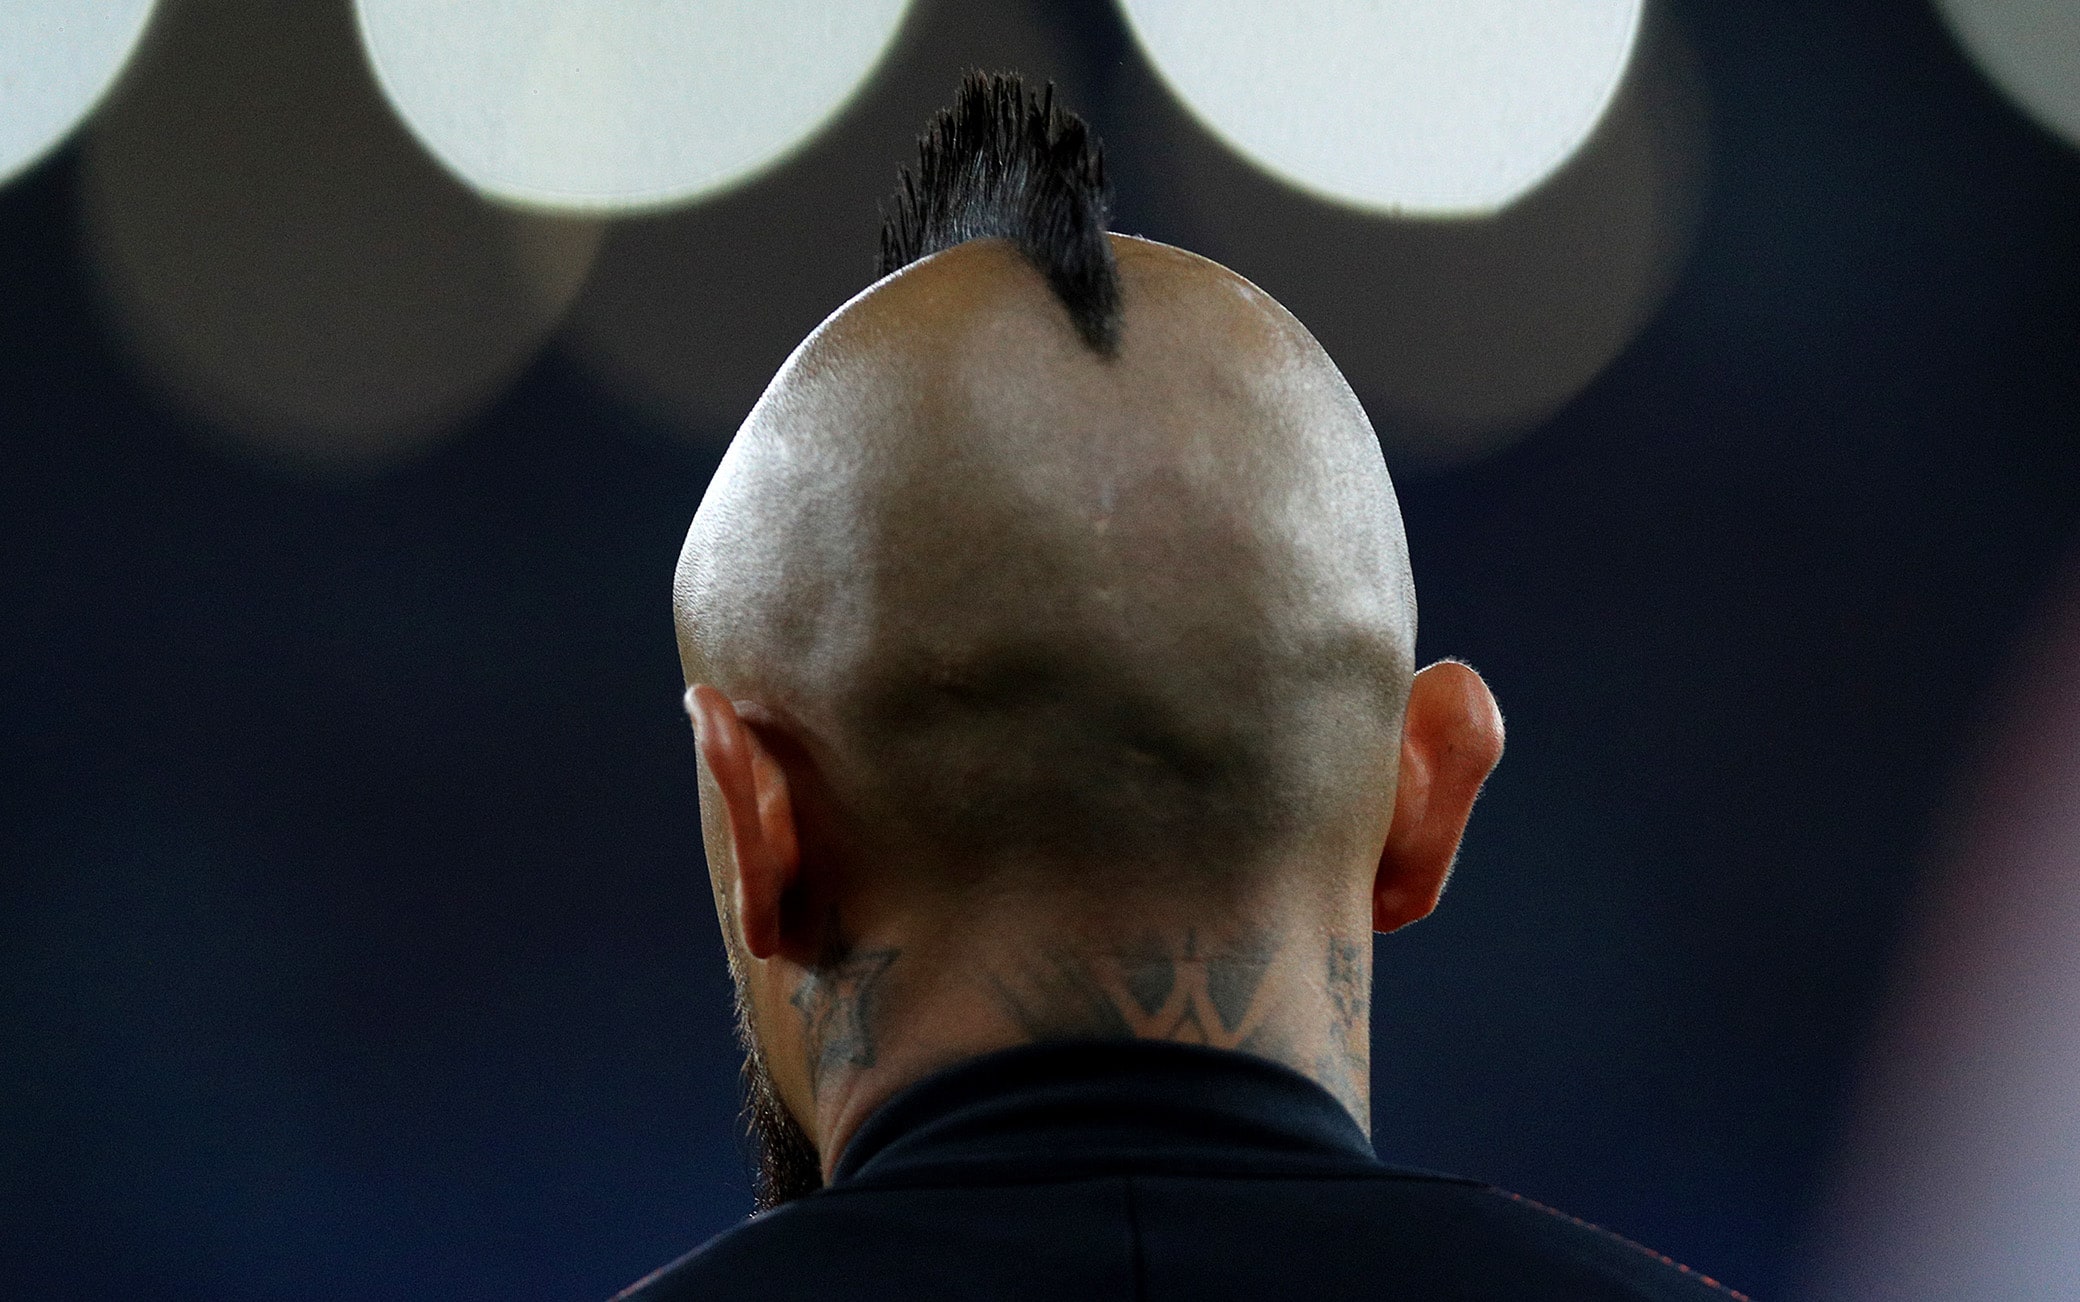 RIO DE JANEIRO, BRAZIL - JUNE 24: Arturo Vidal of Chile looks on before the Copa America Brazil 2019 group C match between Chile and Uruguay at Maracana Stadium on June 24, 2019 in Rio de Janeiro, Brazil. (Photo by Buda Mendes/Getty Images)